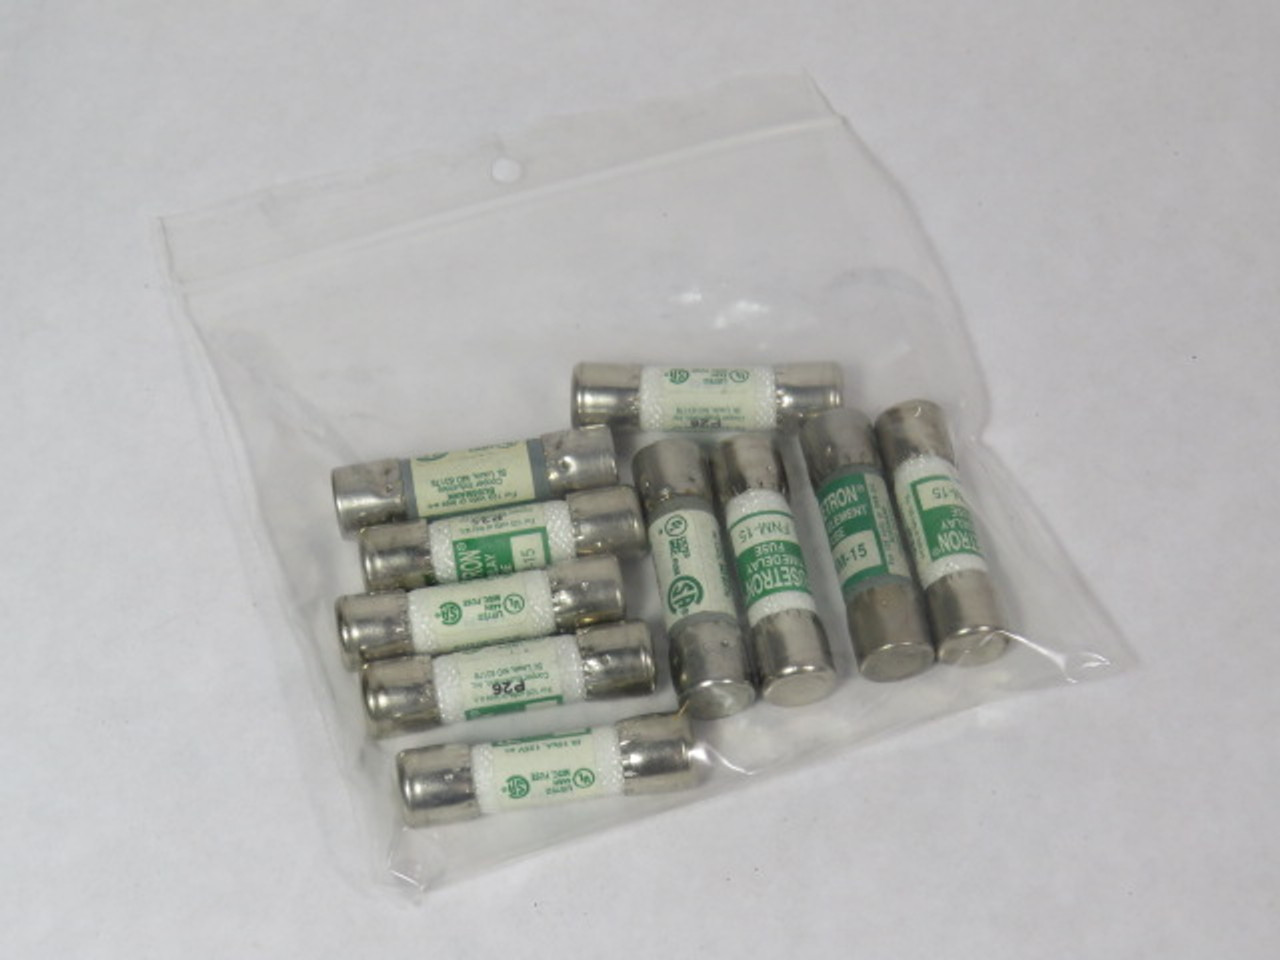 Fusetron FNM-15 Time Delay Fuse 15A 125V Lot of 10 USED